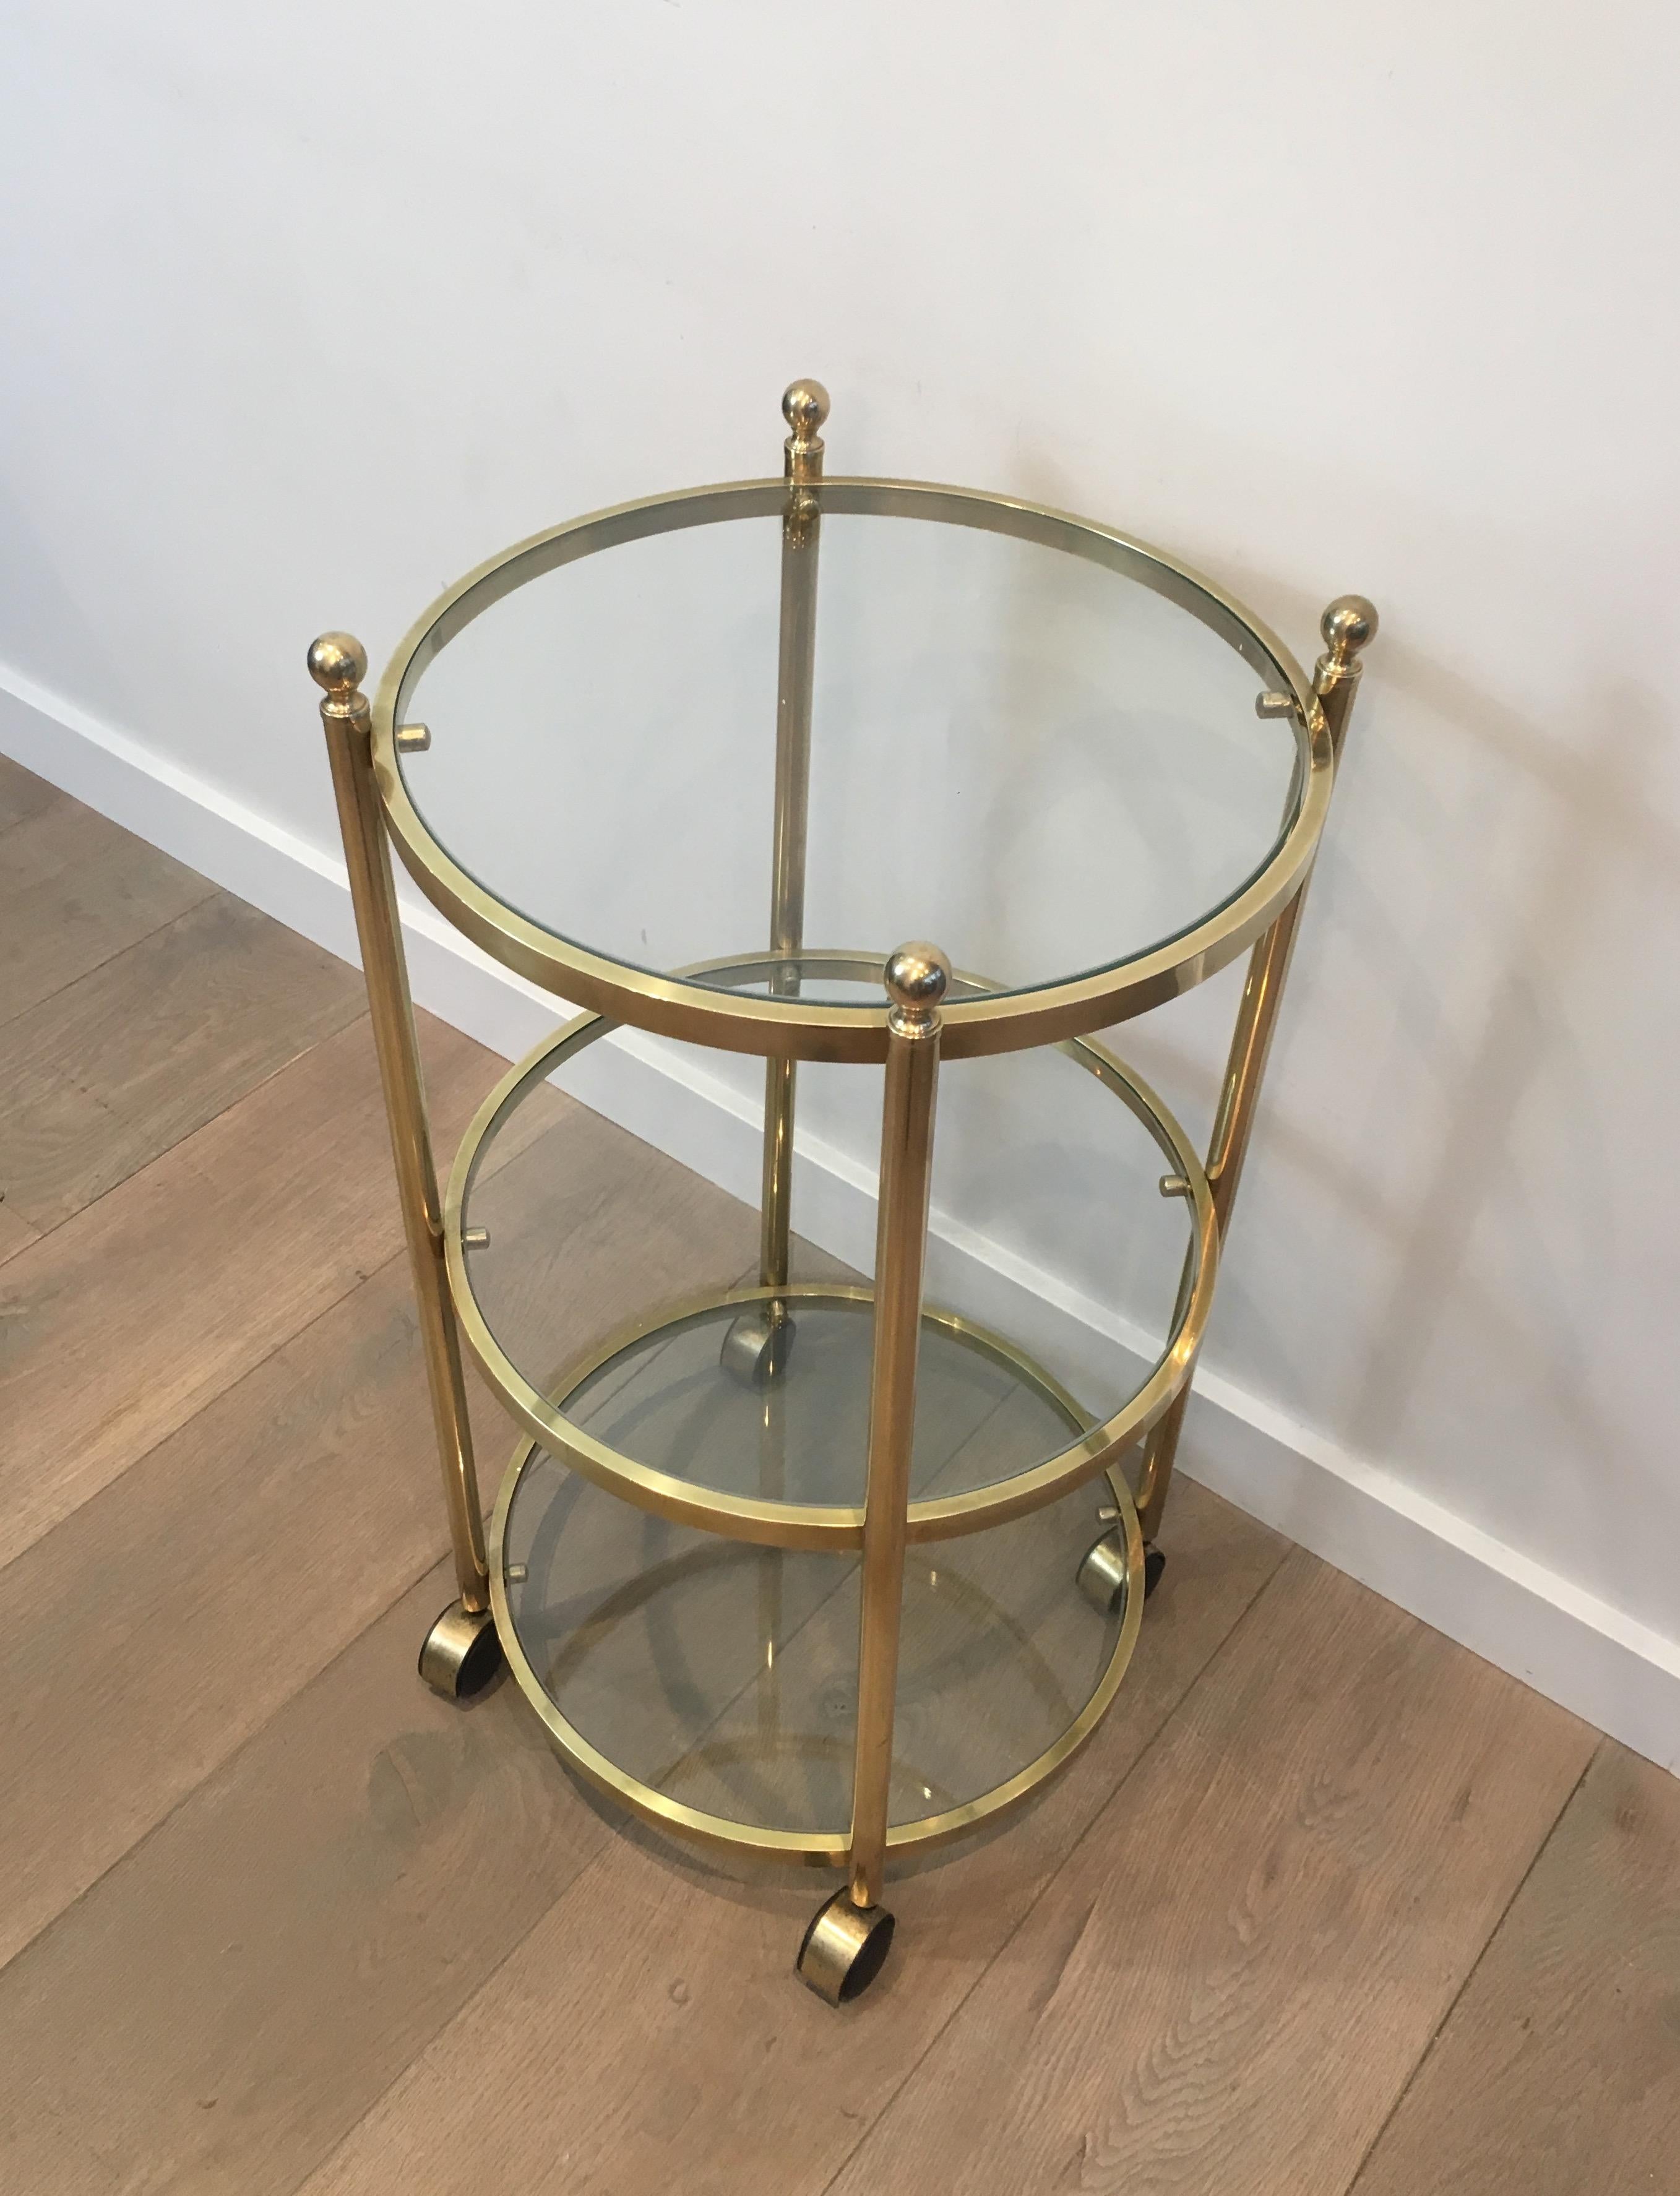 This 3 tiers round side table on casters is made of brass with 3 clear glass shelves and gilt and black plastic casters. The quality is very good. This is a French work, circa 1970.